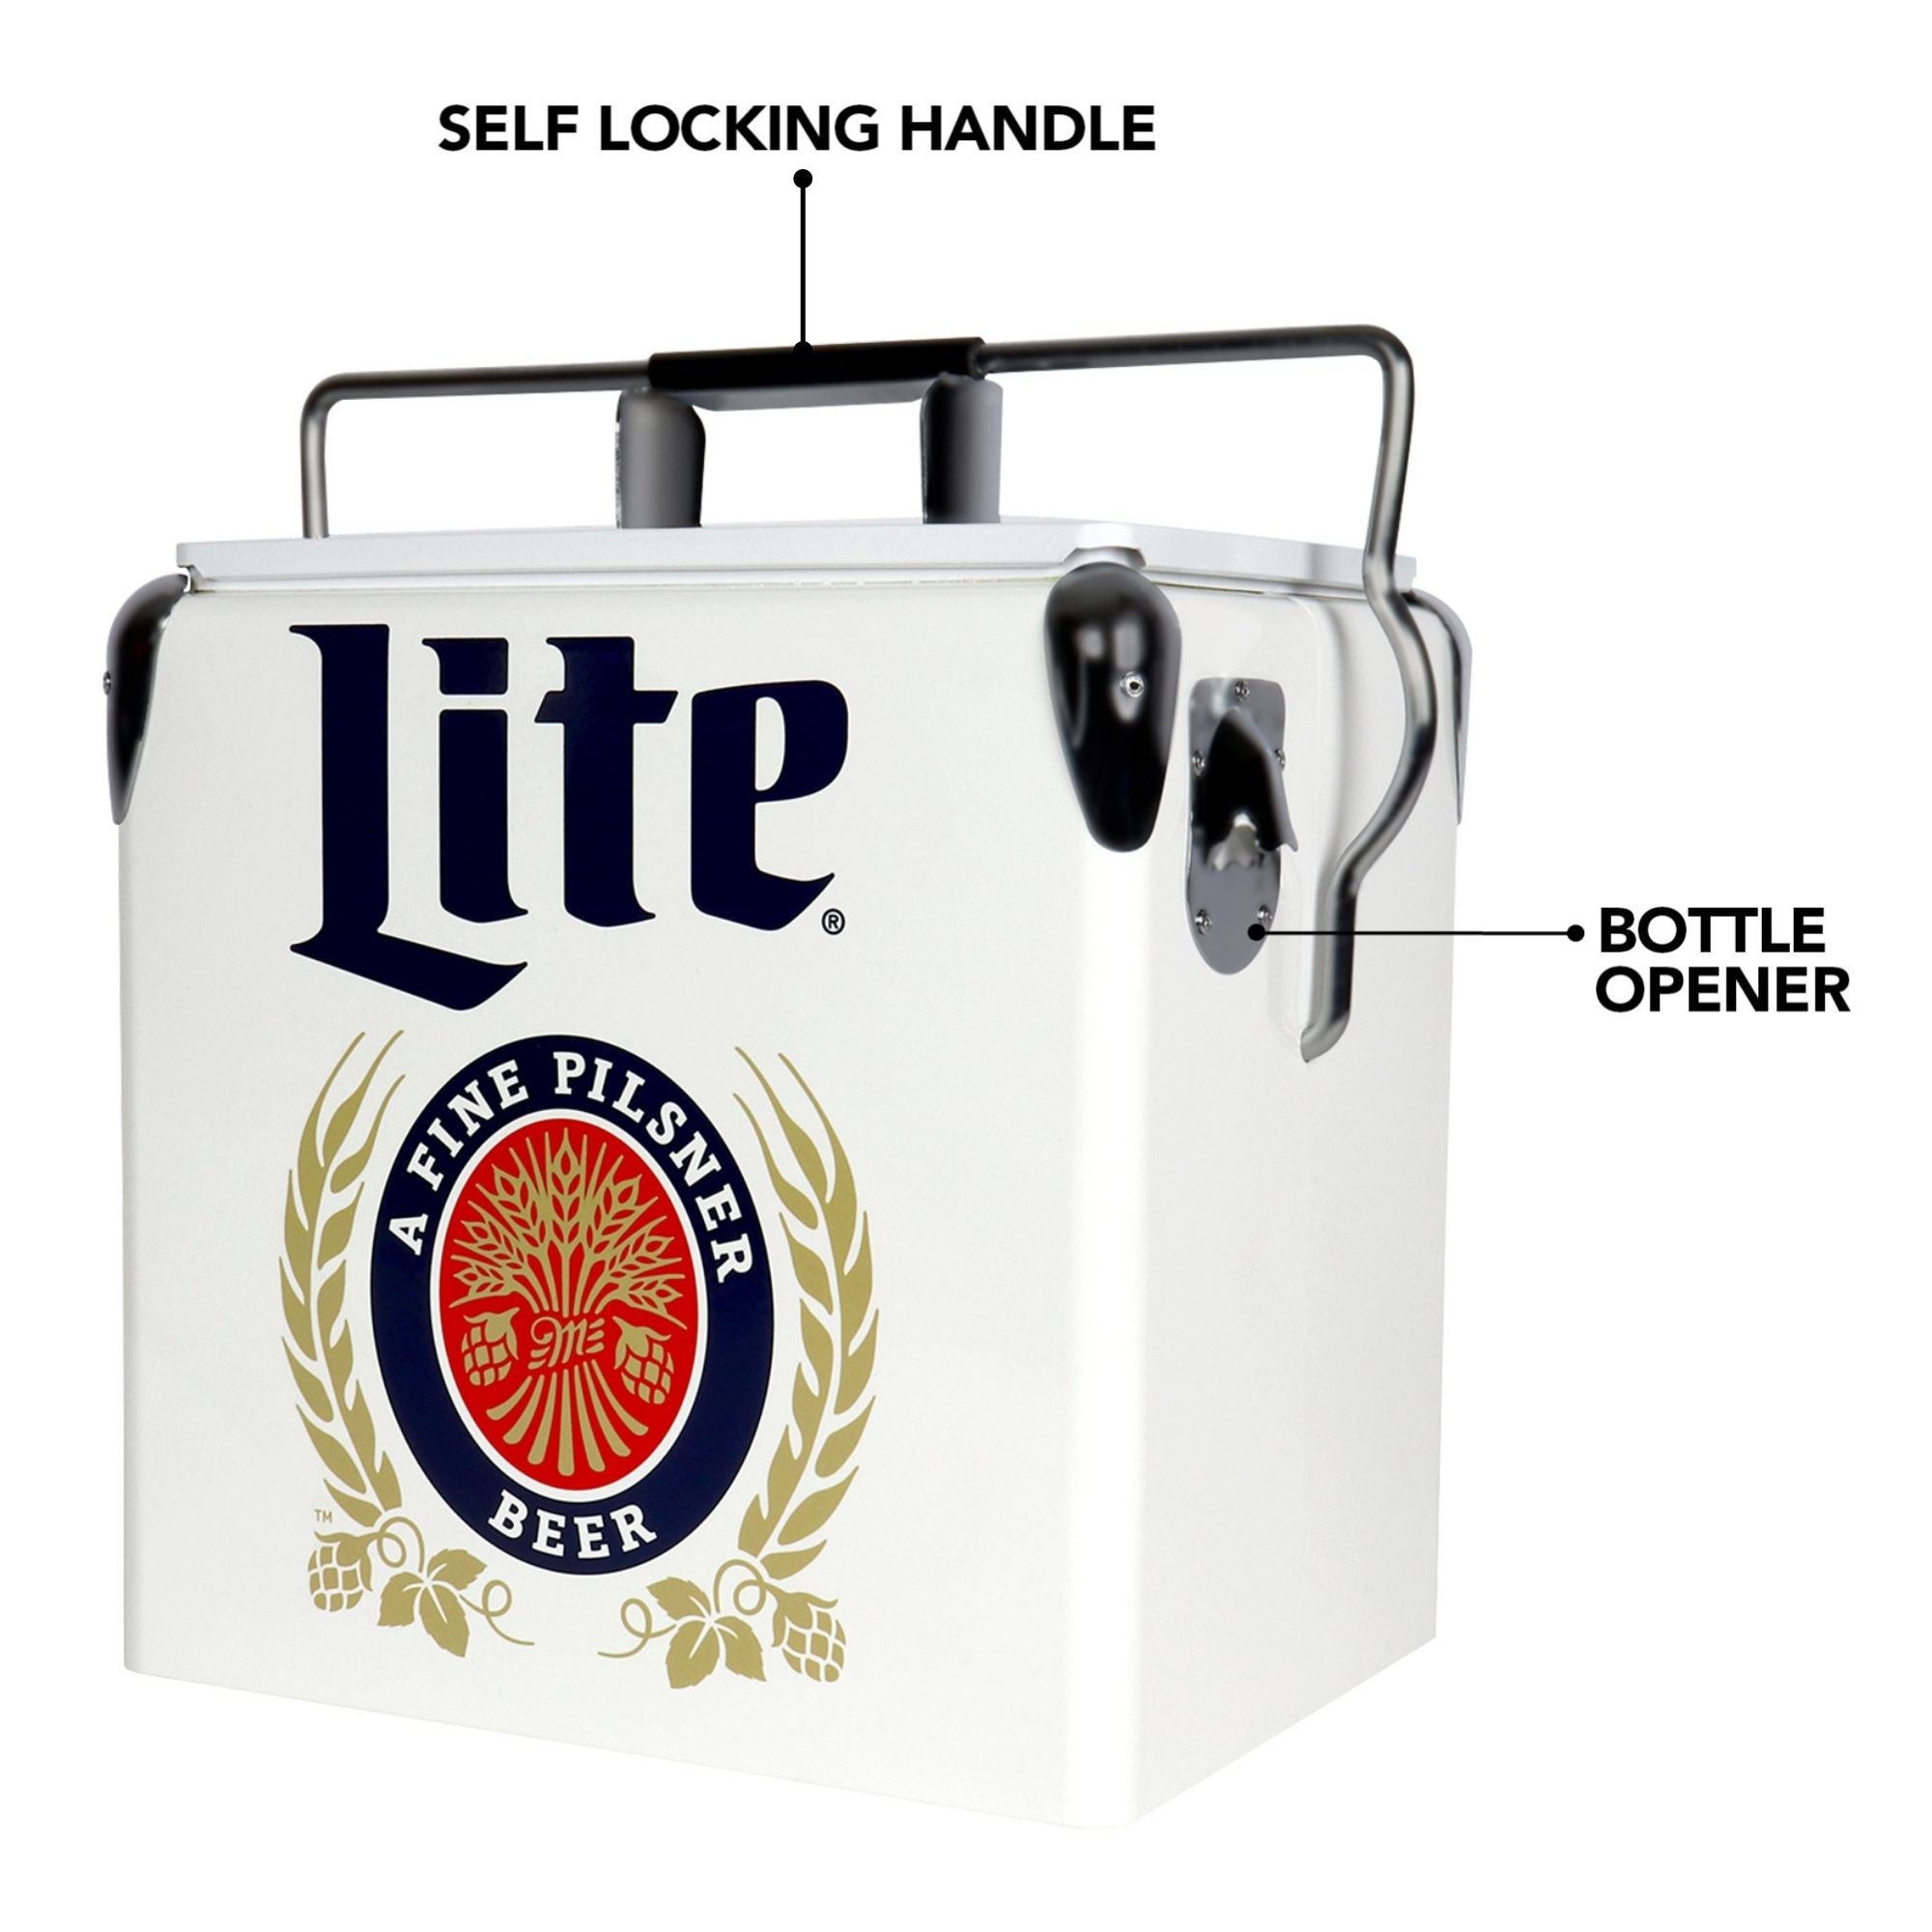 Product shot of Miller Lite 14 qt retro cooler with bottle opener, closed, on a white background, with parts labeled: Self-locking handle; bottle opener